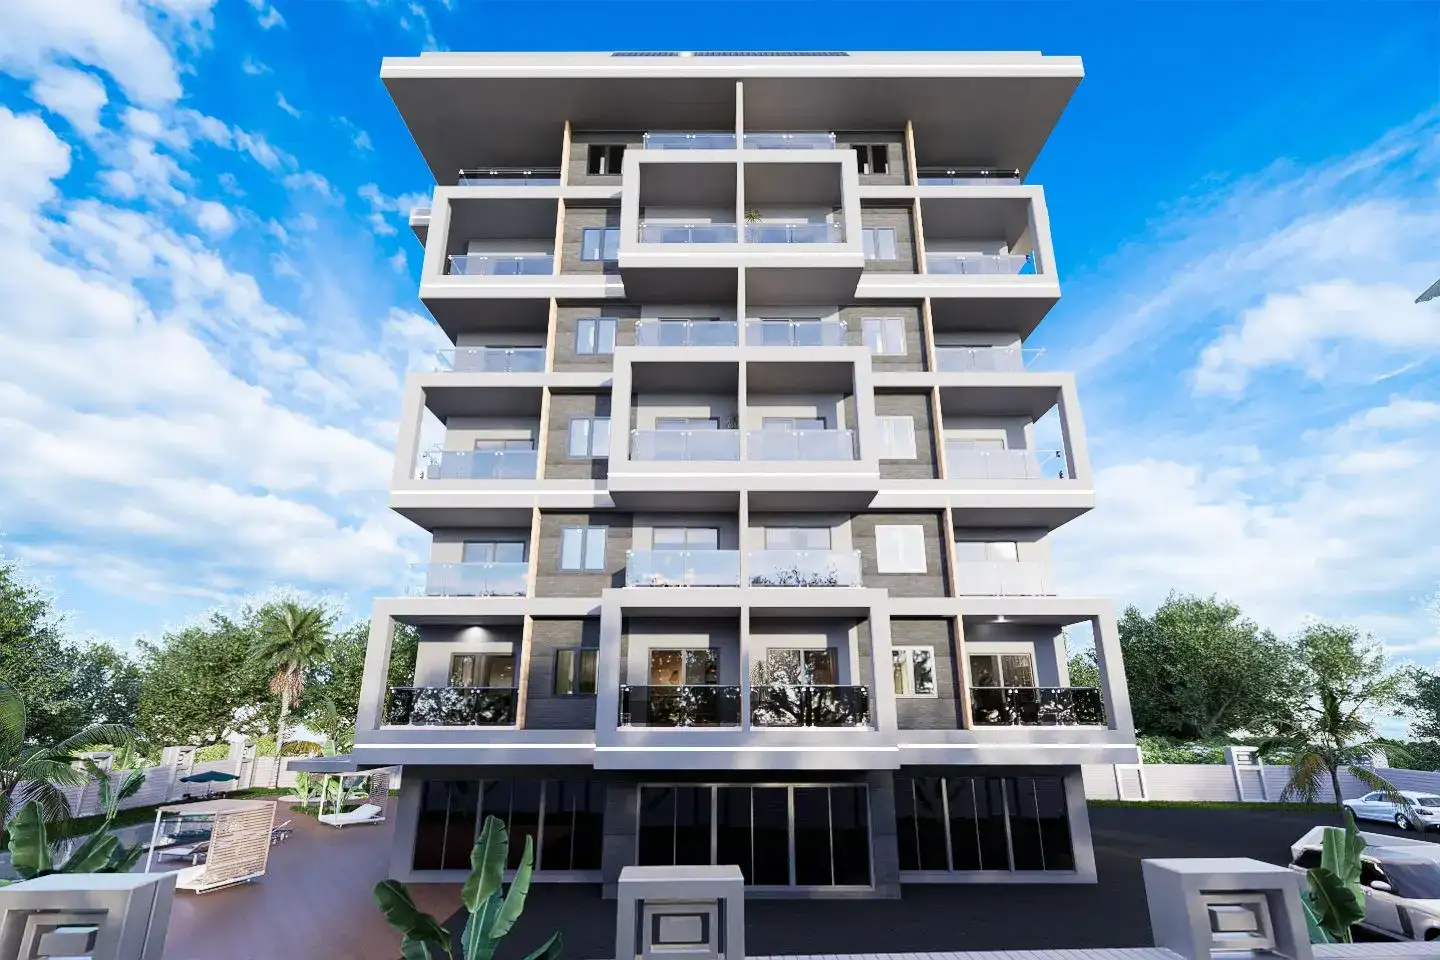 NEW COMPLEX IN DEMIRTAS, ALANYA AT THE COMPLETION STAGE